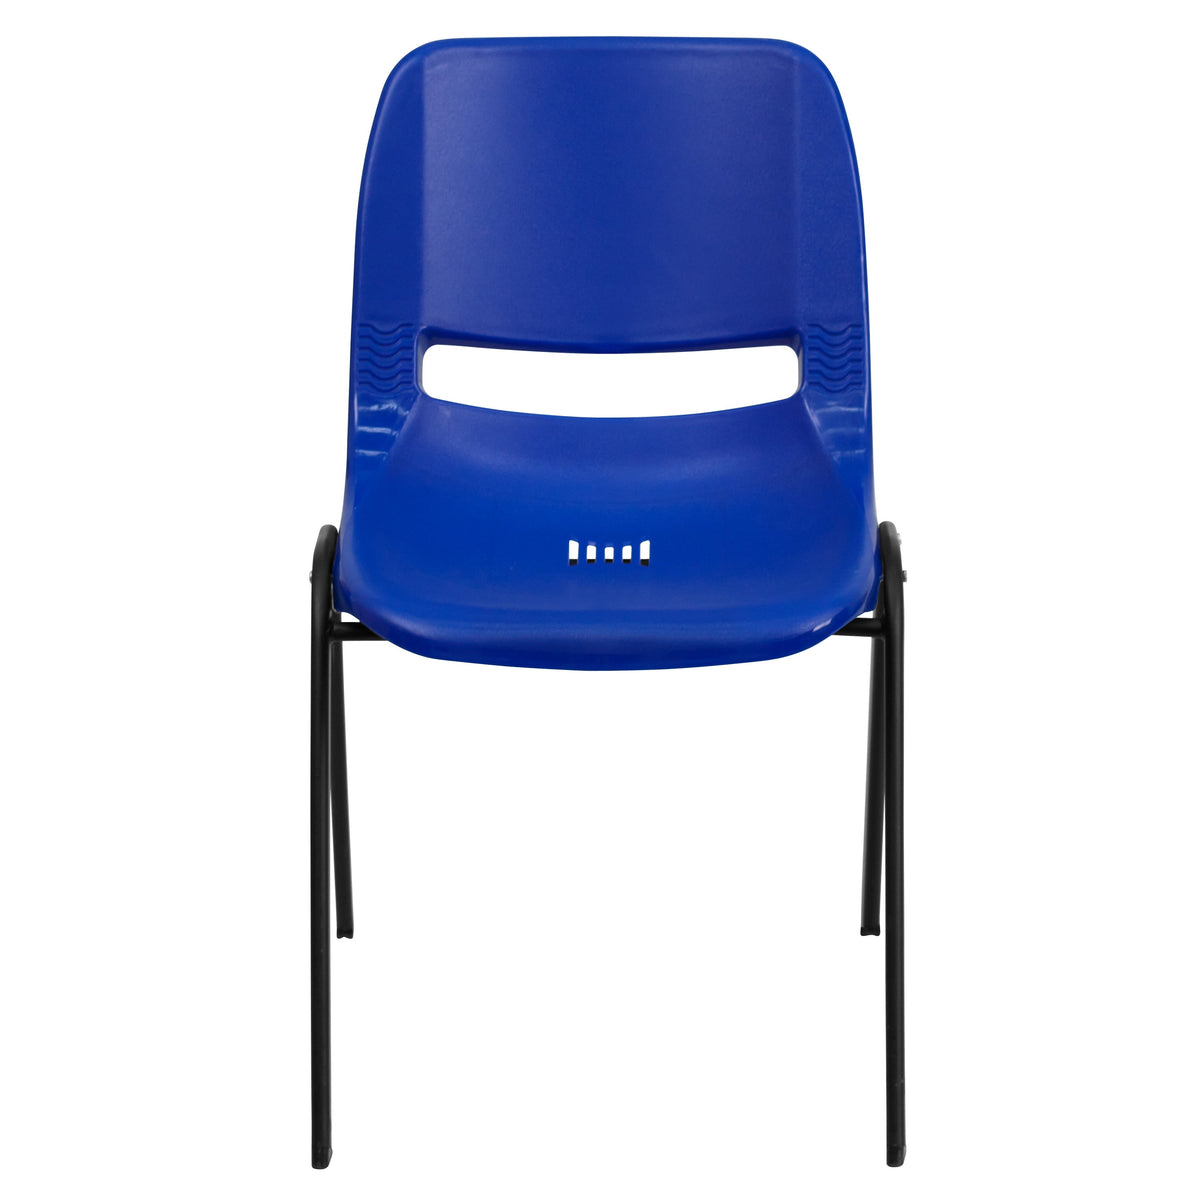 Blue |#| 880 lb. Capacity Blue Ergonomic Shell Stack Chair with Contoured Waterfall Seat